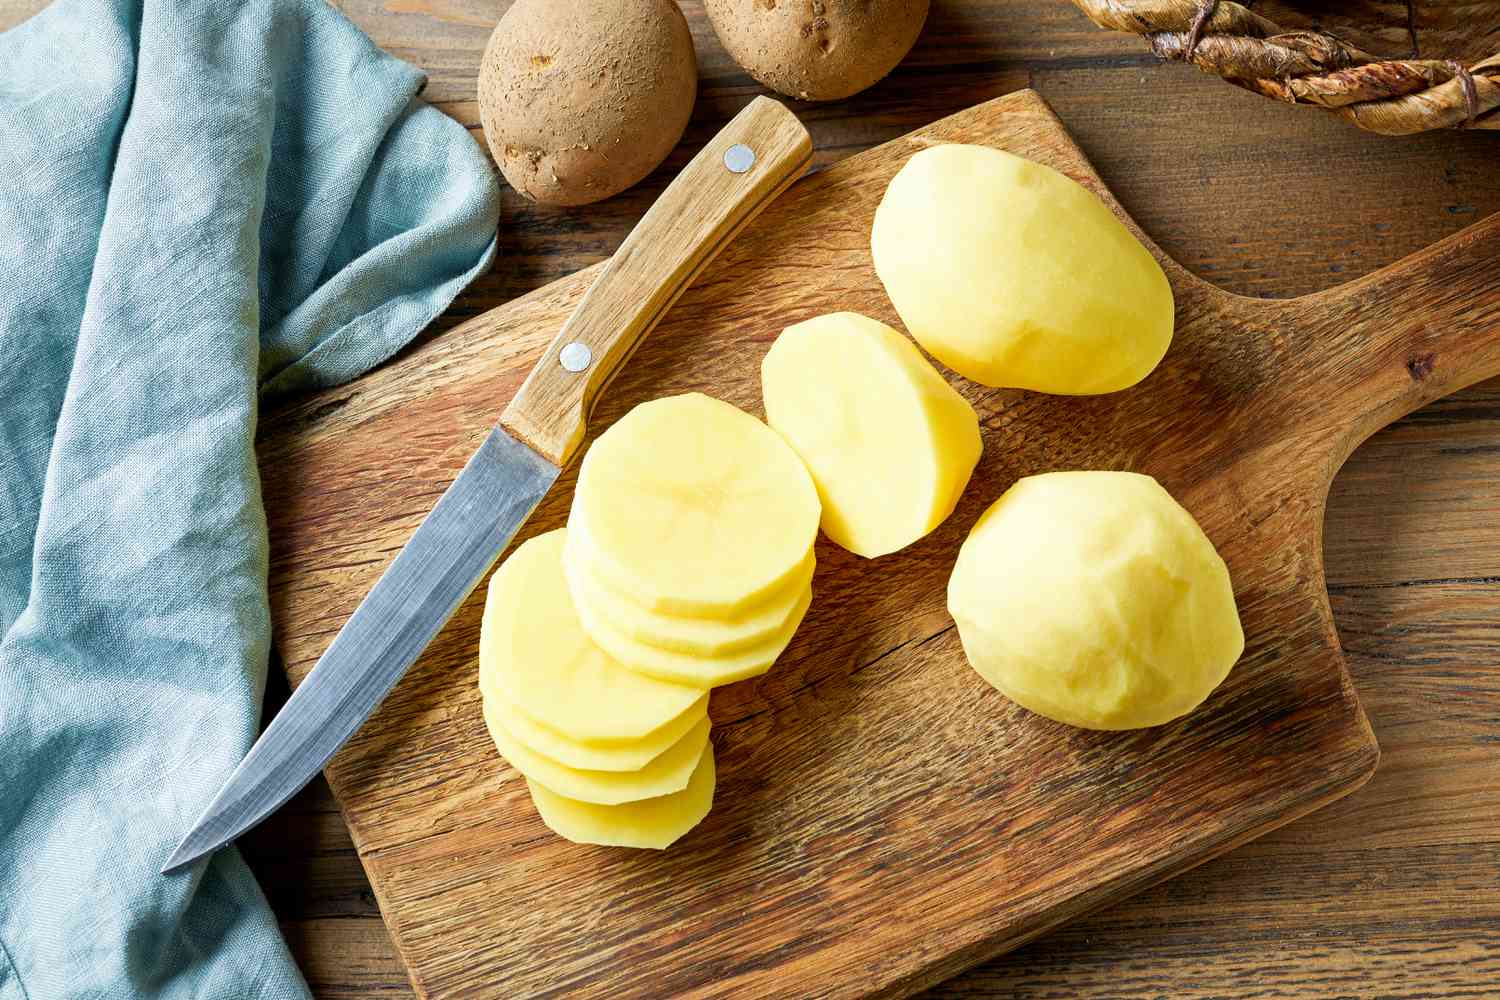 How To Store Peeled Potatoes For A Week